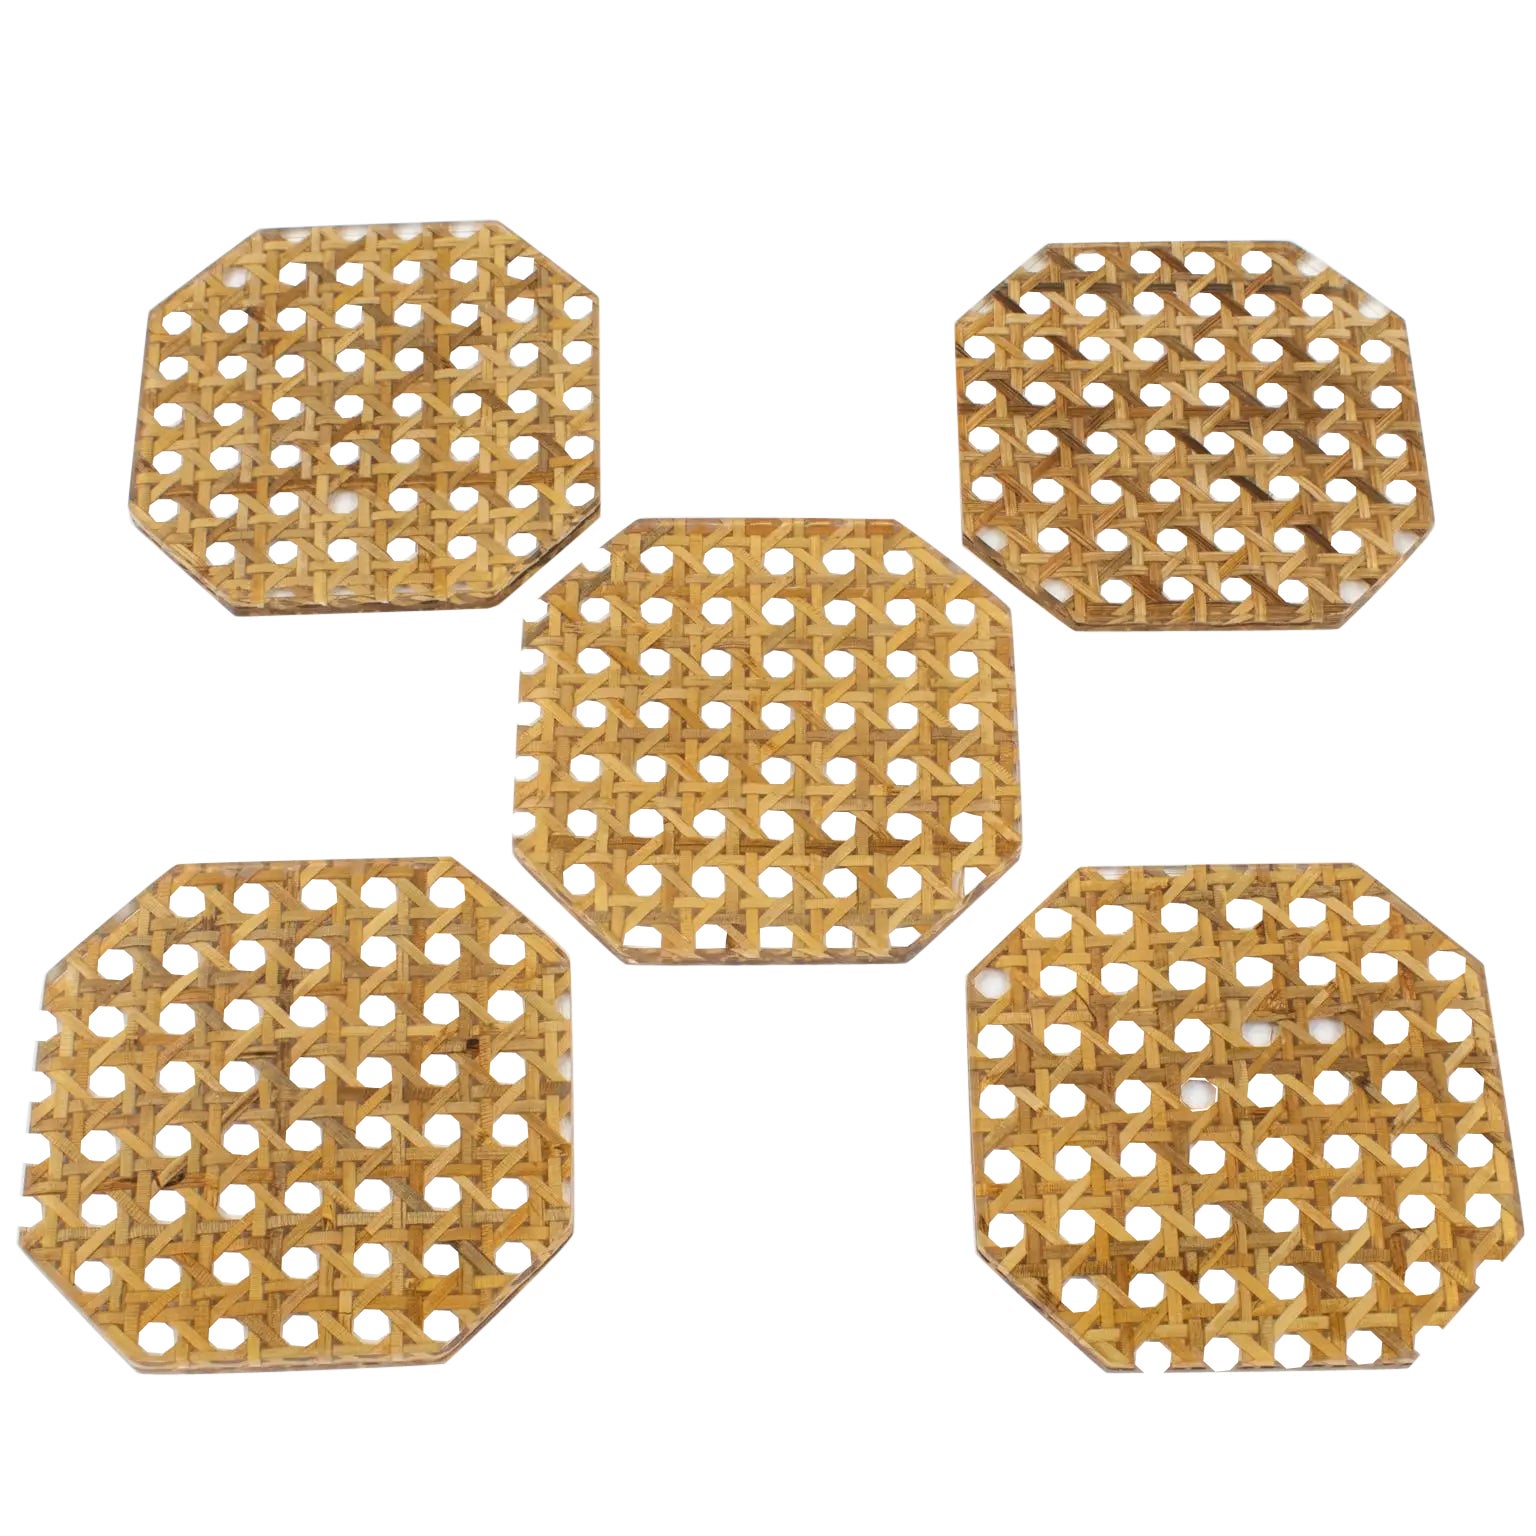 Christian Dior Lucite and Rattan Barware Coasters, set of 5 pieces For Sale